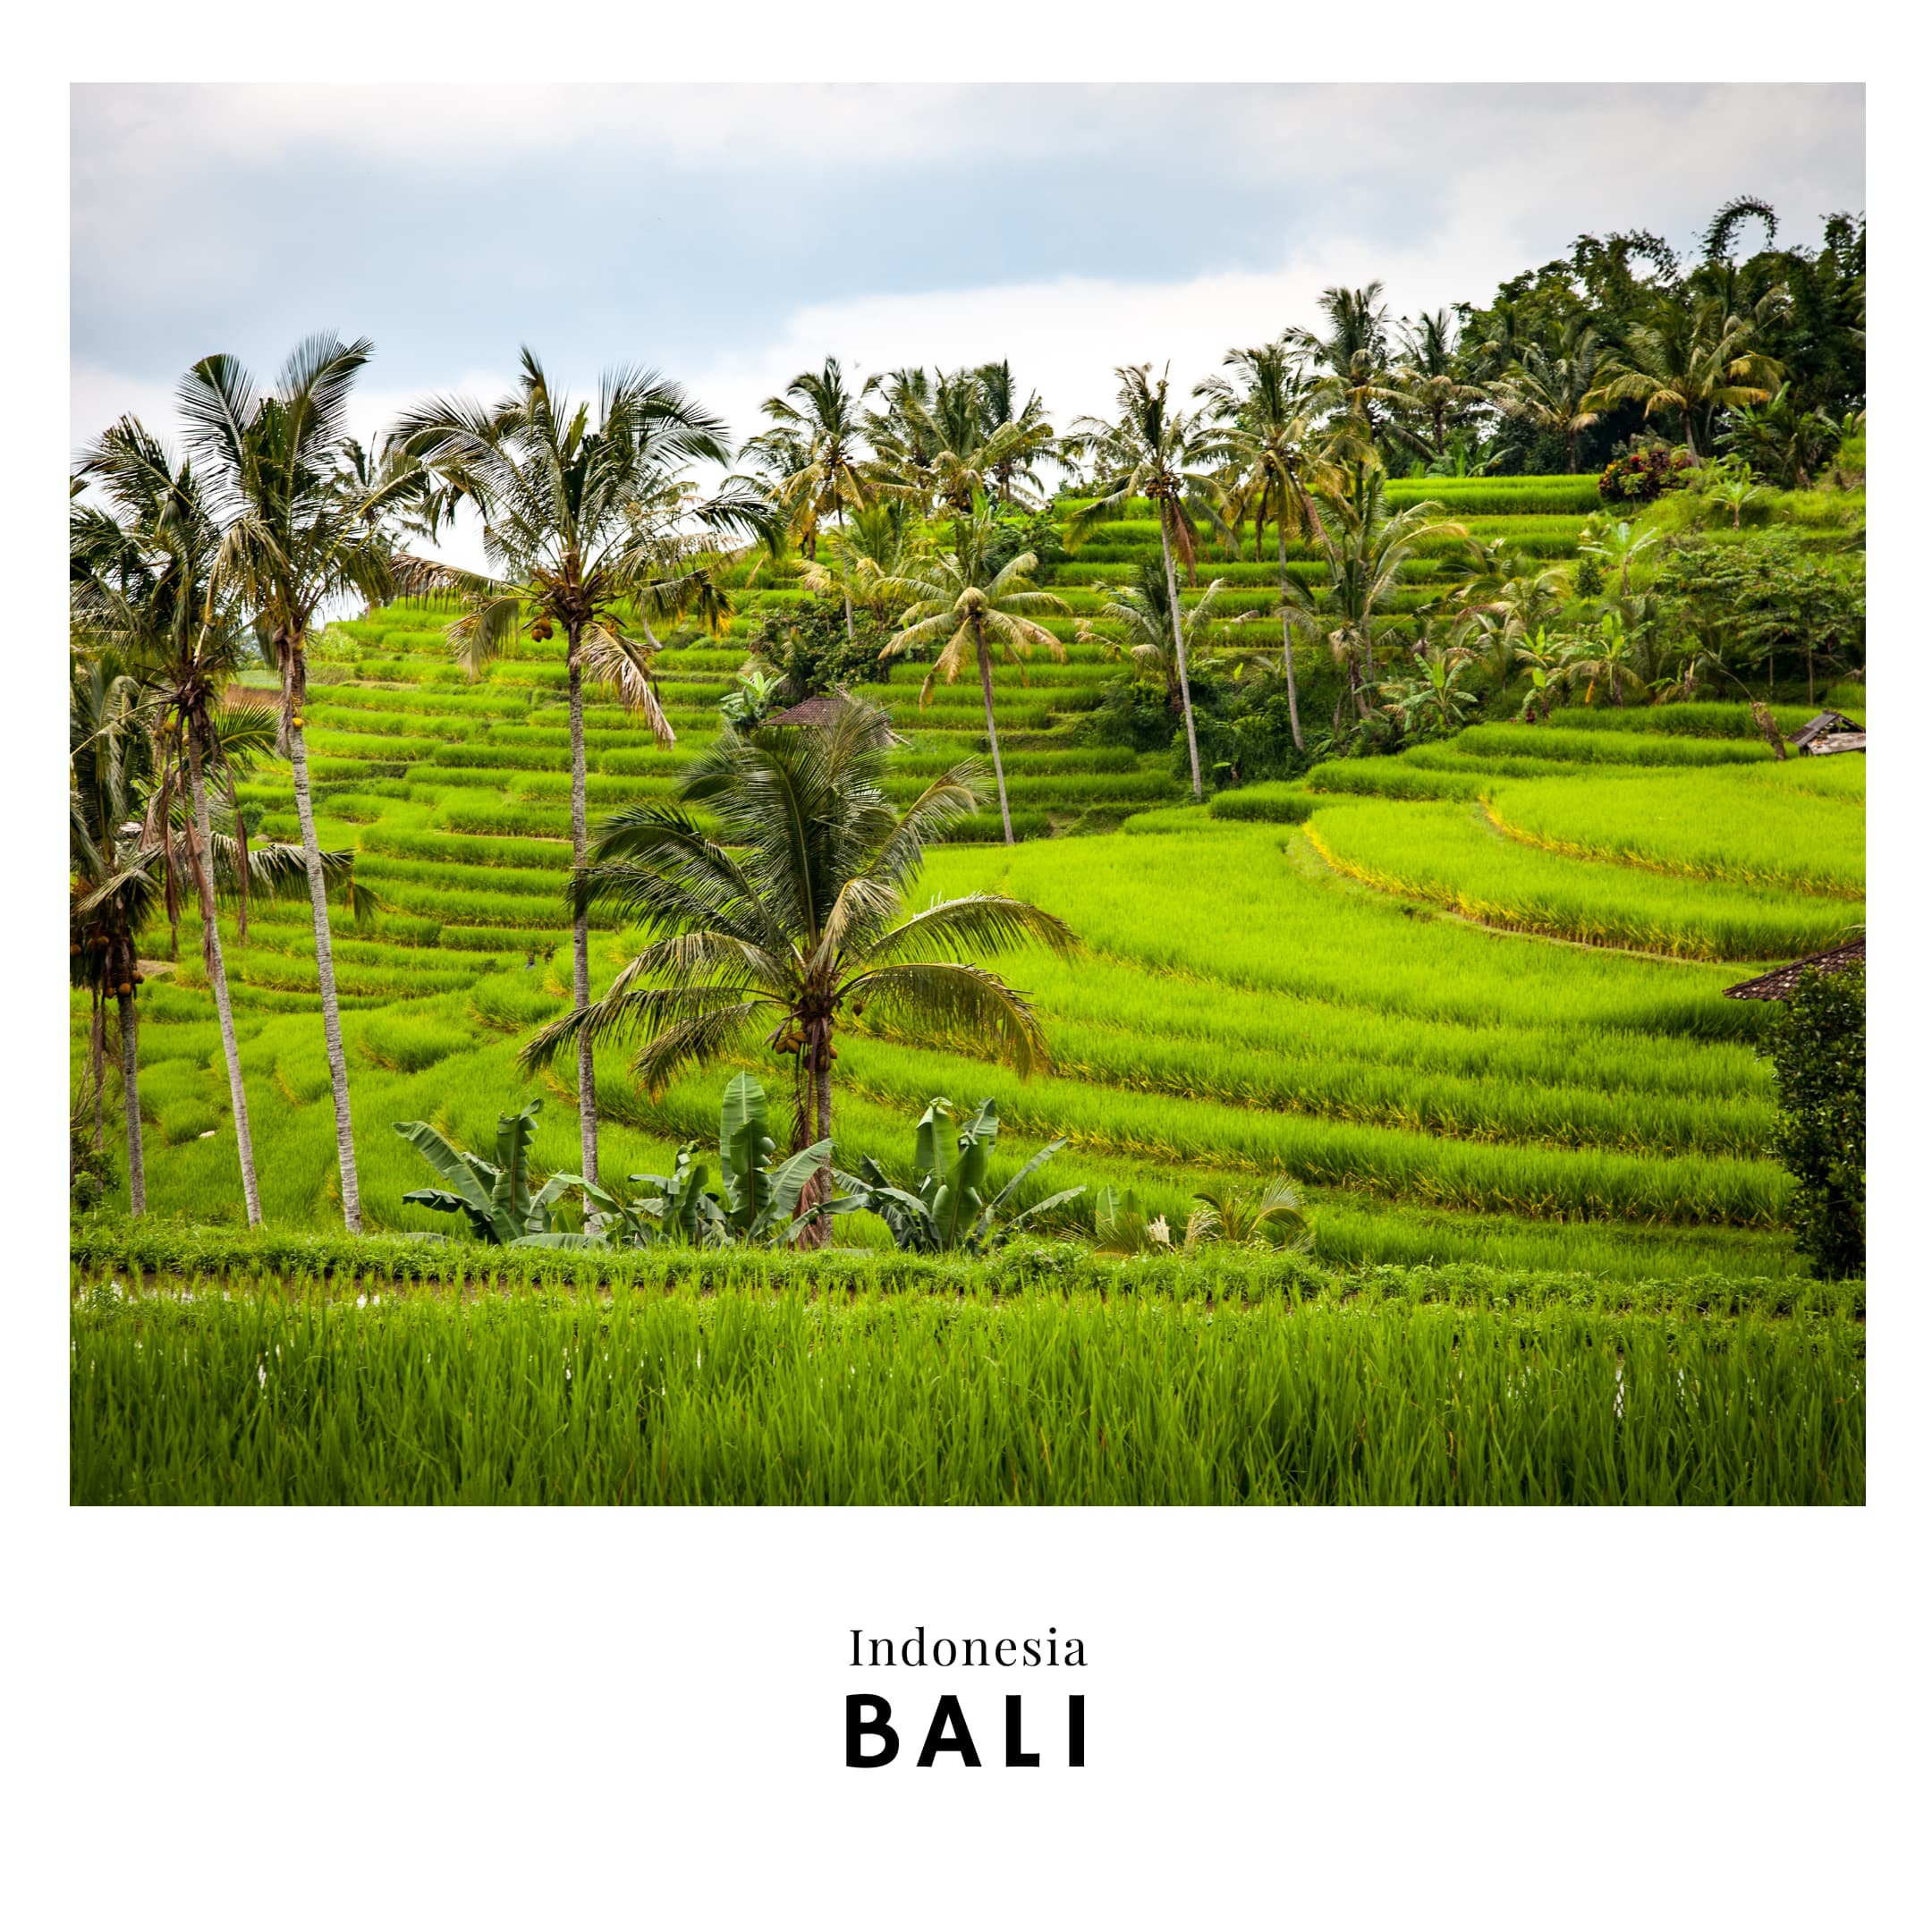 Link to Bali travel guide